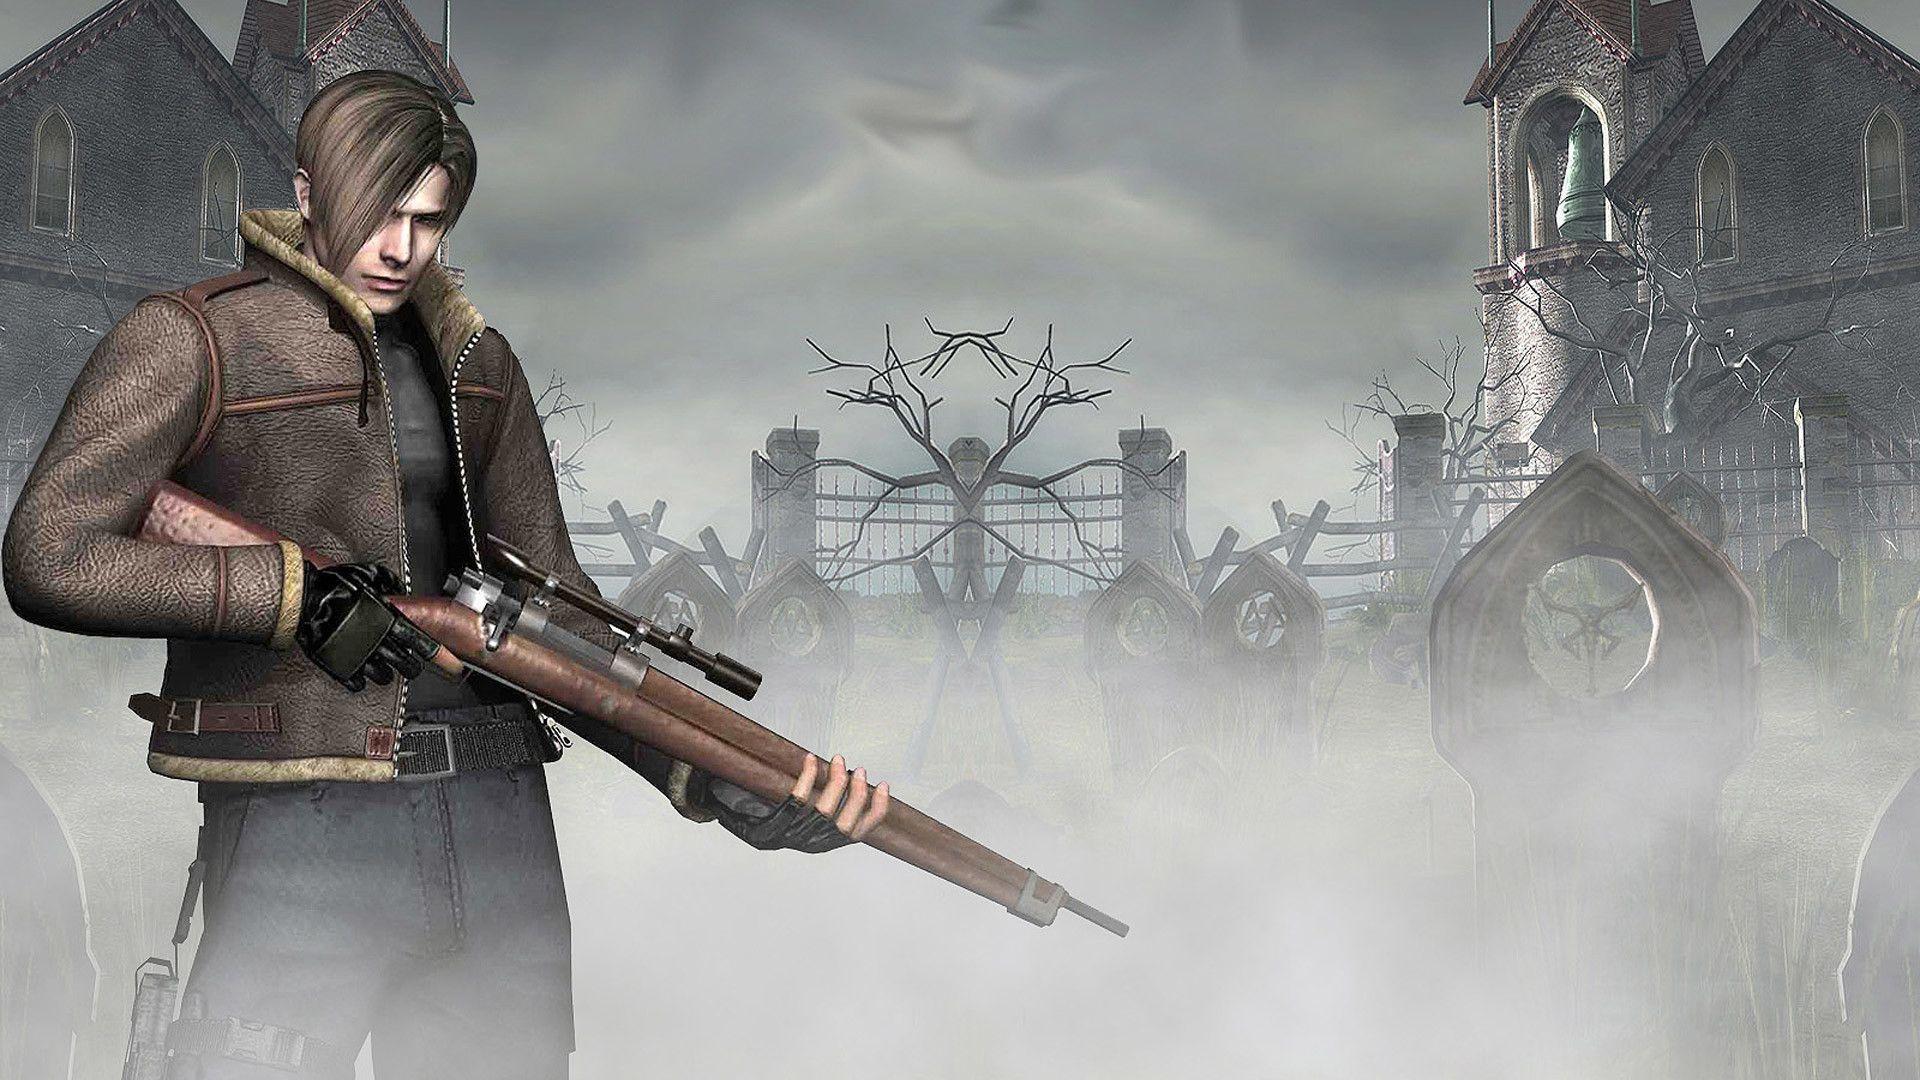 Wallpapers HD Resident Evil 4 - Wallpaper Cave